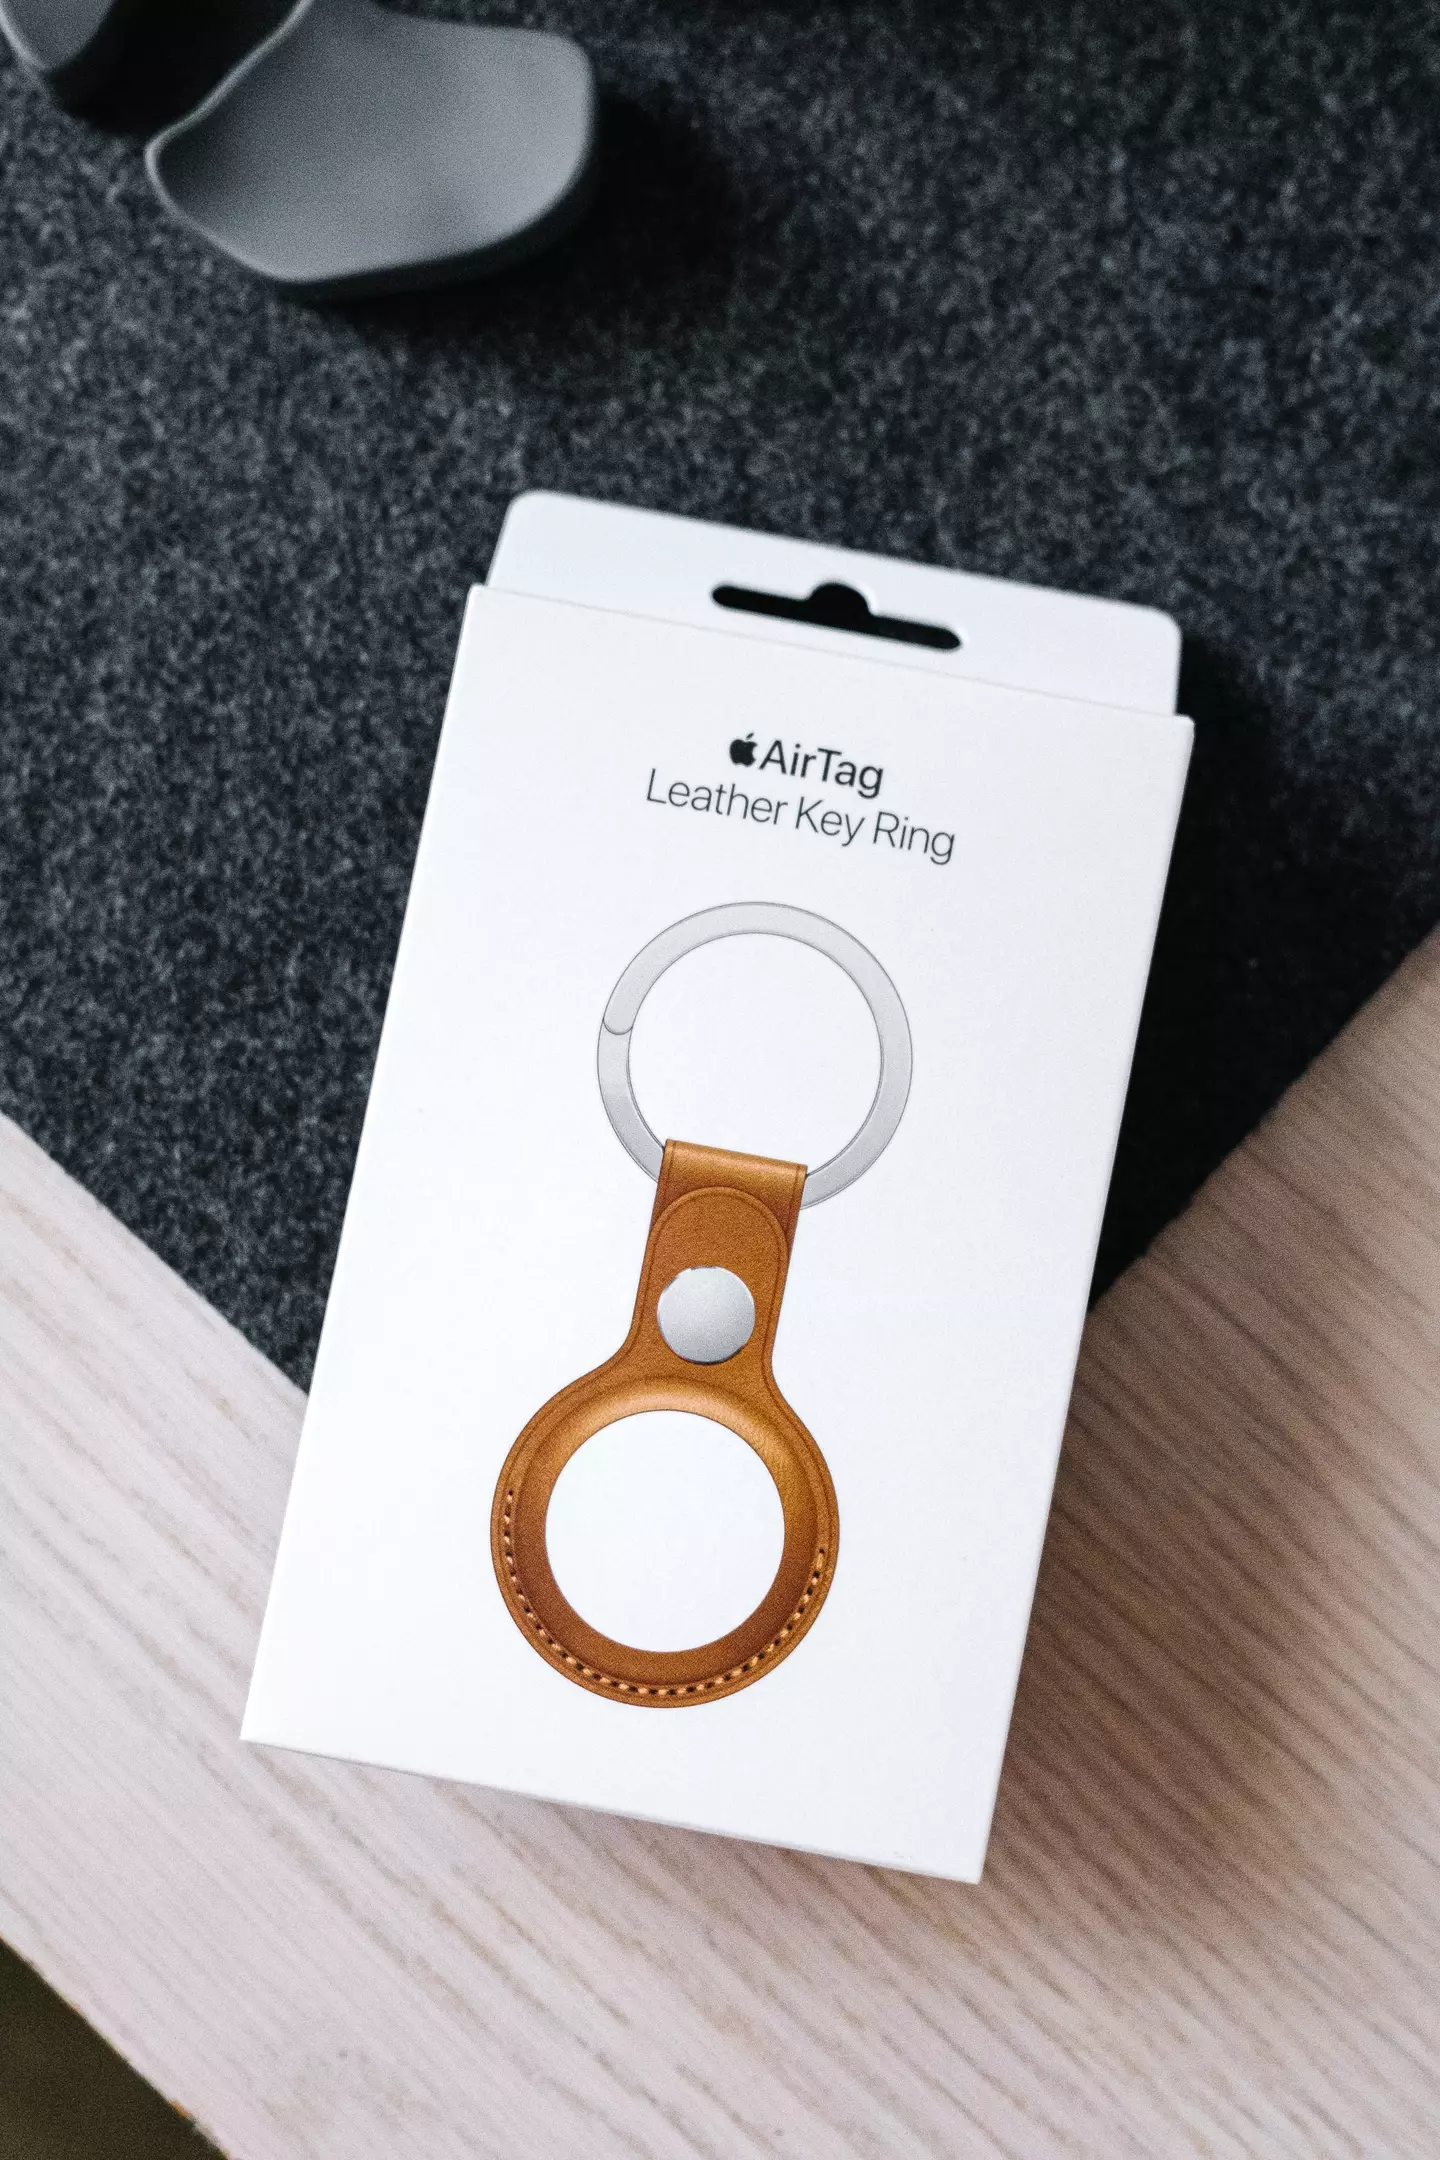 Families of dementia patients are attaching Apple AirTags in a bid to keep their loved ones safe,